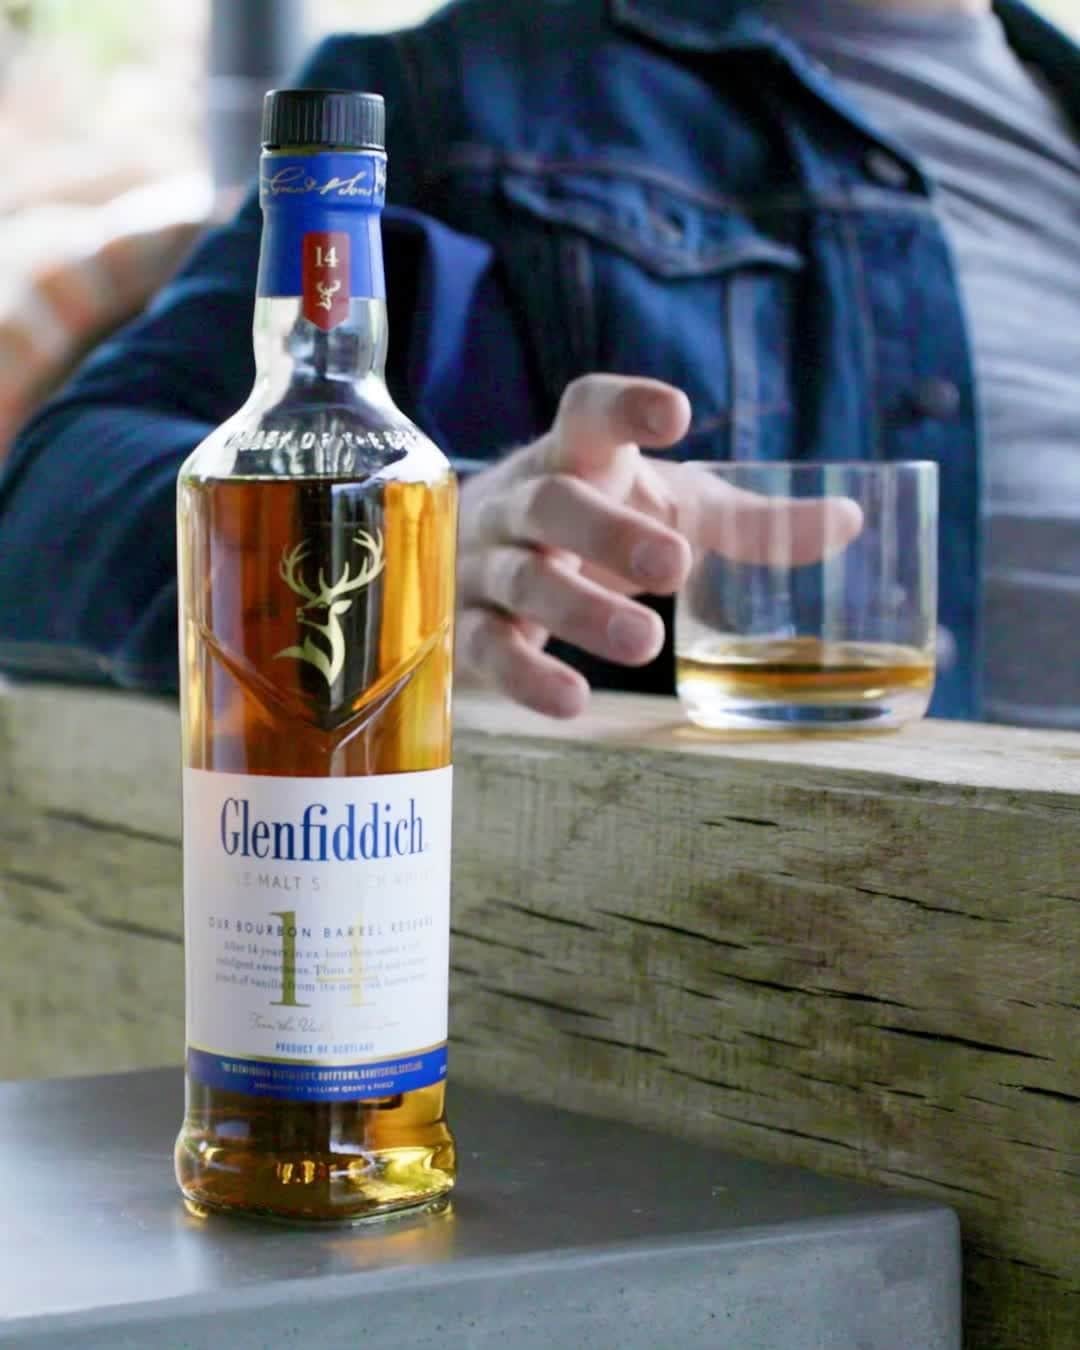 Glenfiddich USのインスタグラム：「Whisky Wednesdays are arguably our favorite day of the week second only to Fiddich Fridays of course… 😁 #Glenfiddich #Glenfiddich14」